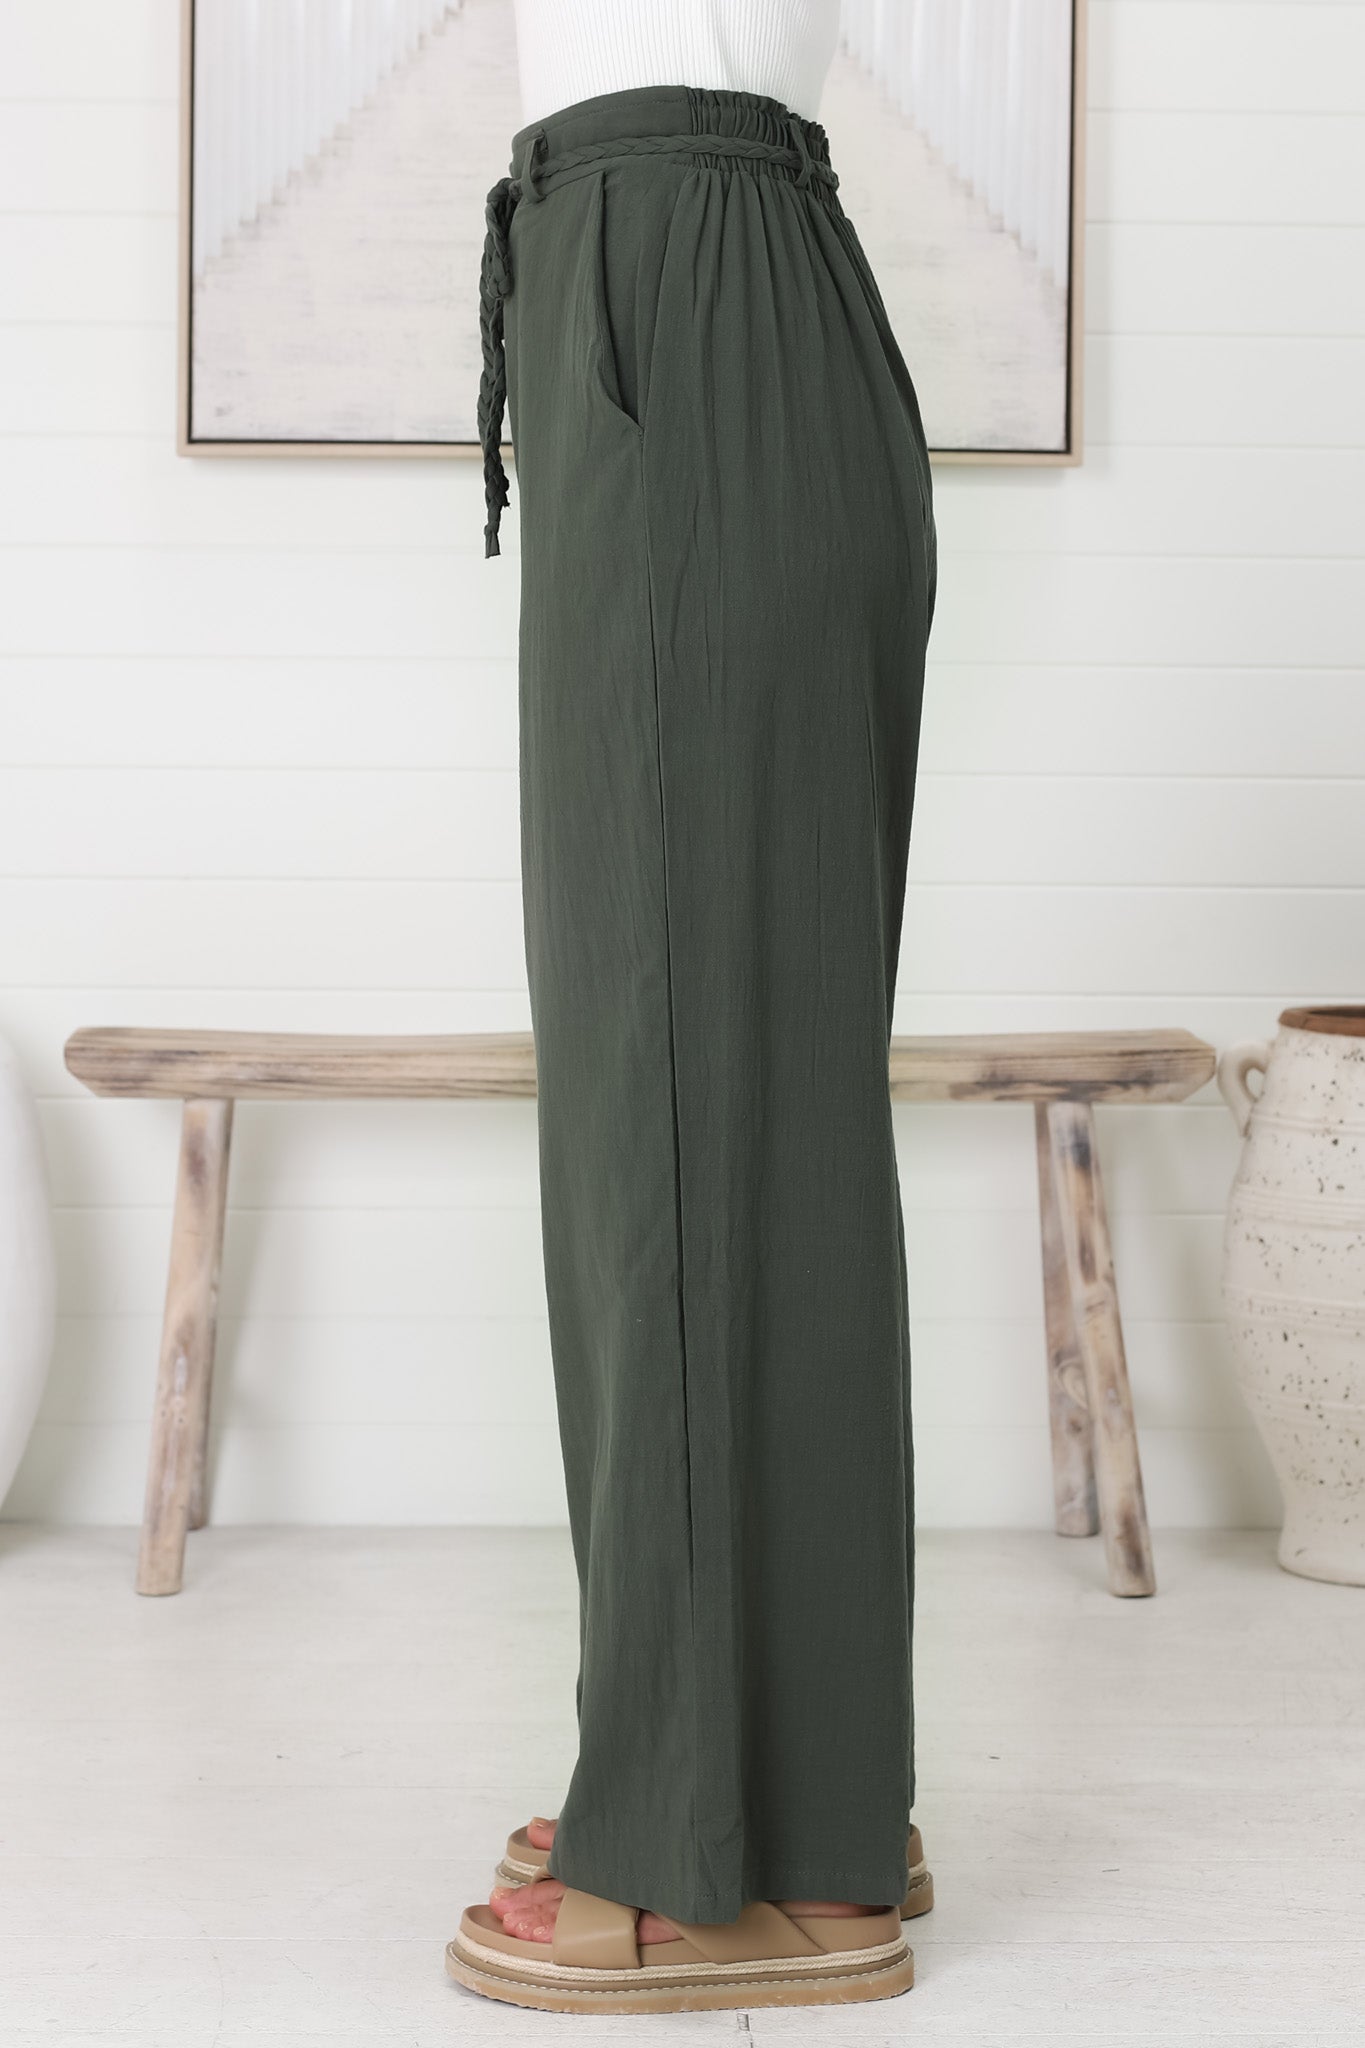 Roswell Pants - Cotton Wide Leg Pant with Plaited Belt in Green